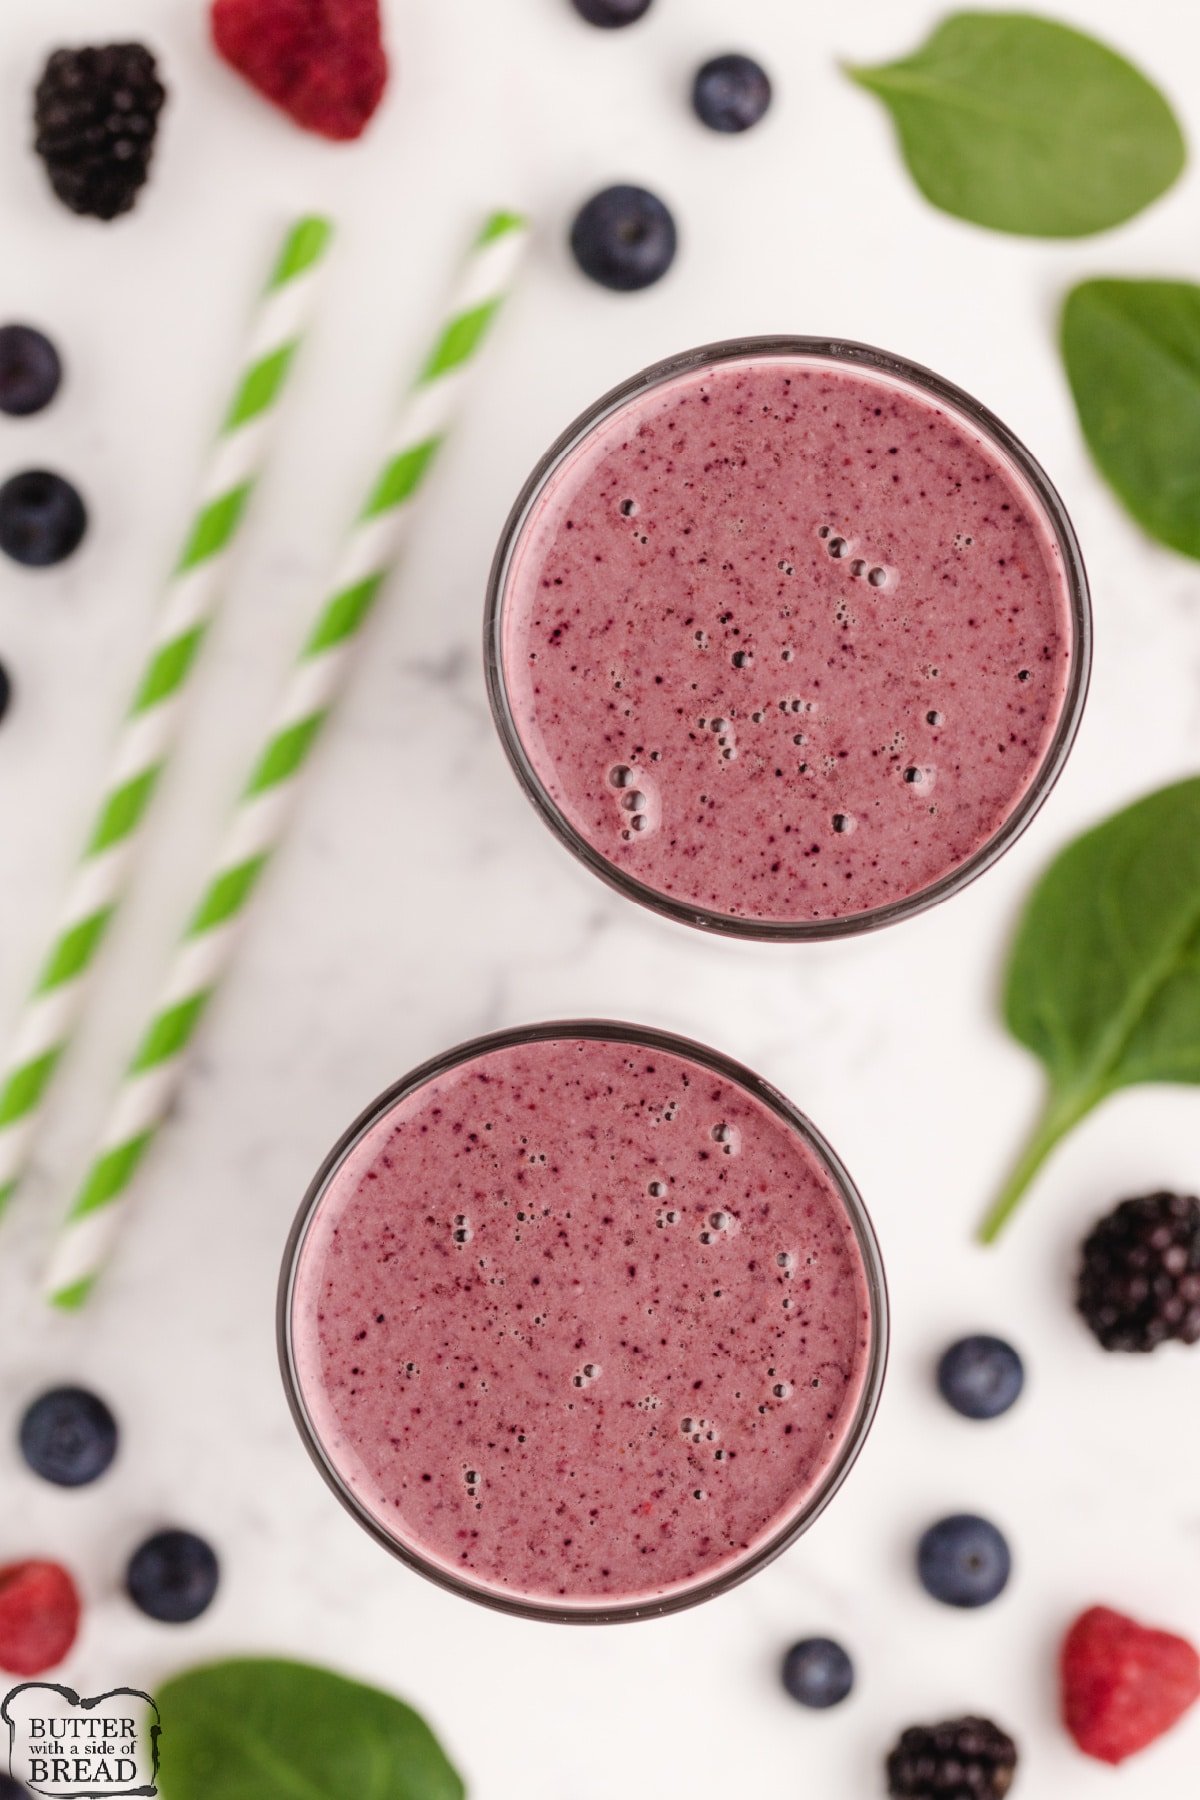 Smoothies made with spinach and berries